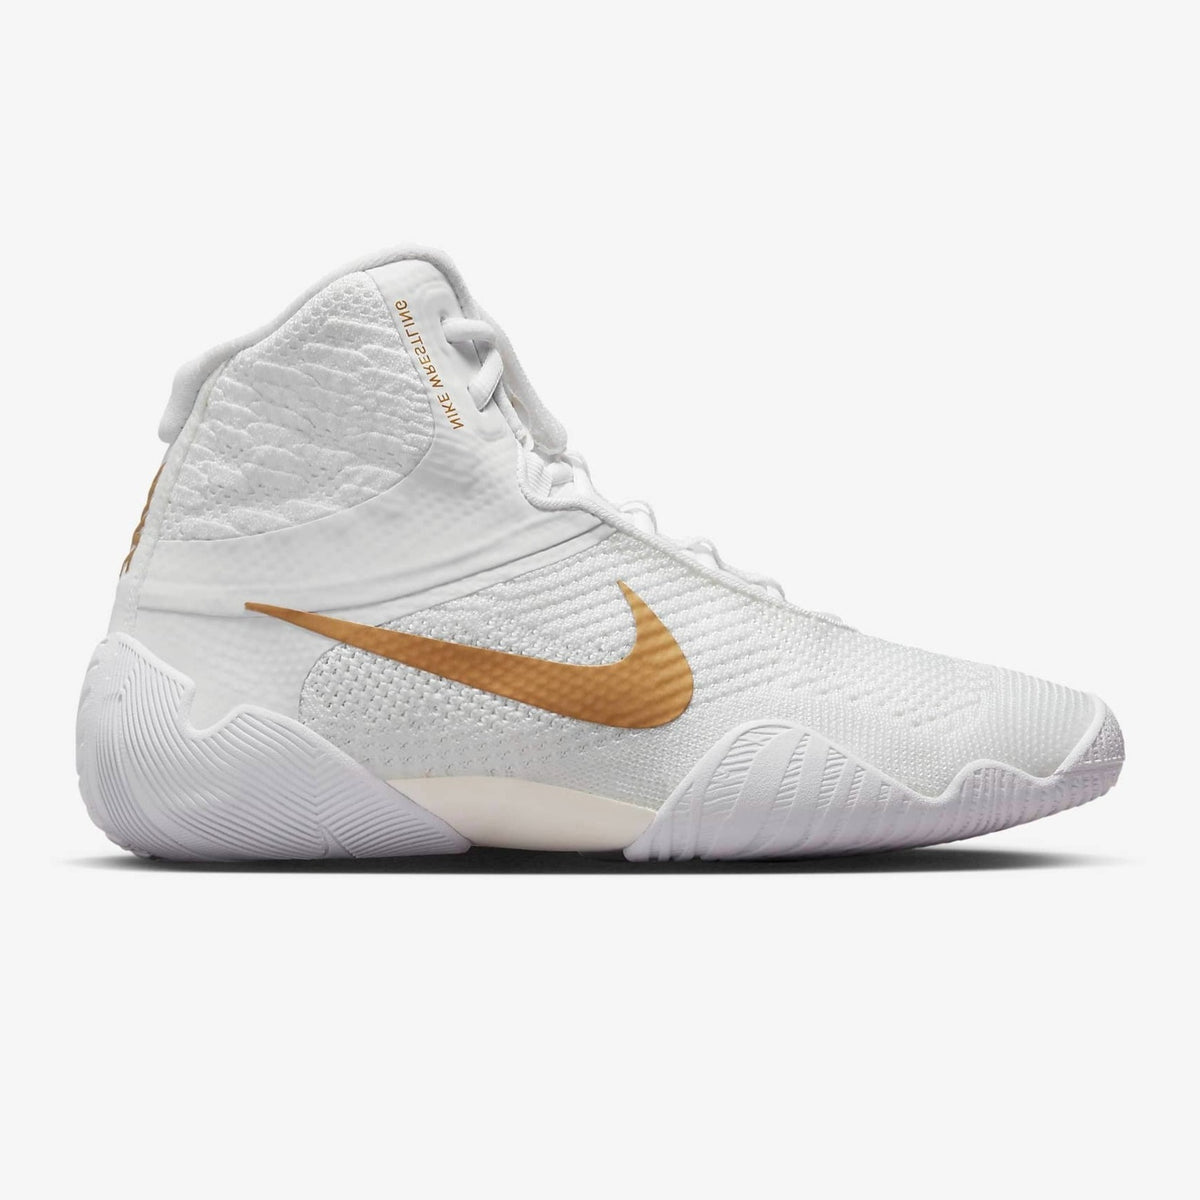 Nike TAWA wrestling shoes. Worn on the mat by world champions and Olympic champions. Great support during training and competition in the usual Nike quality. Wrestling shoes in the color white/gold..